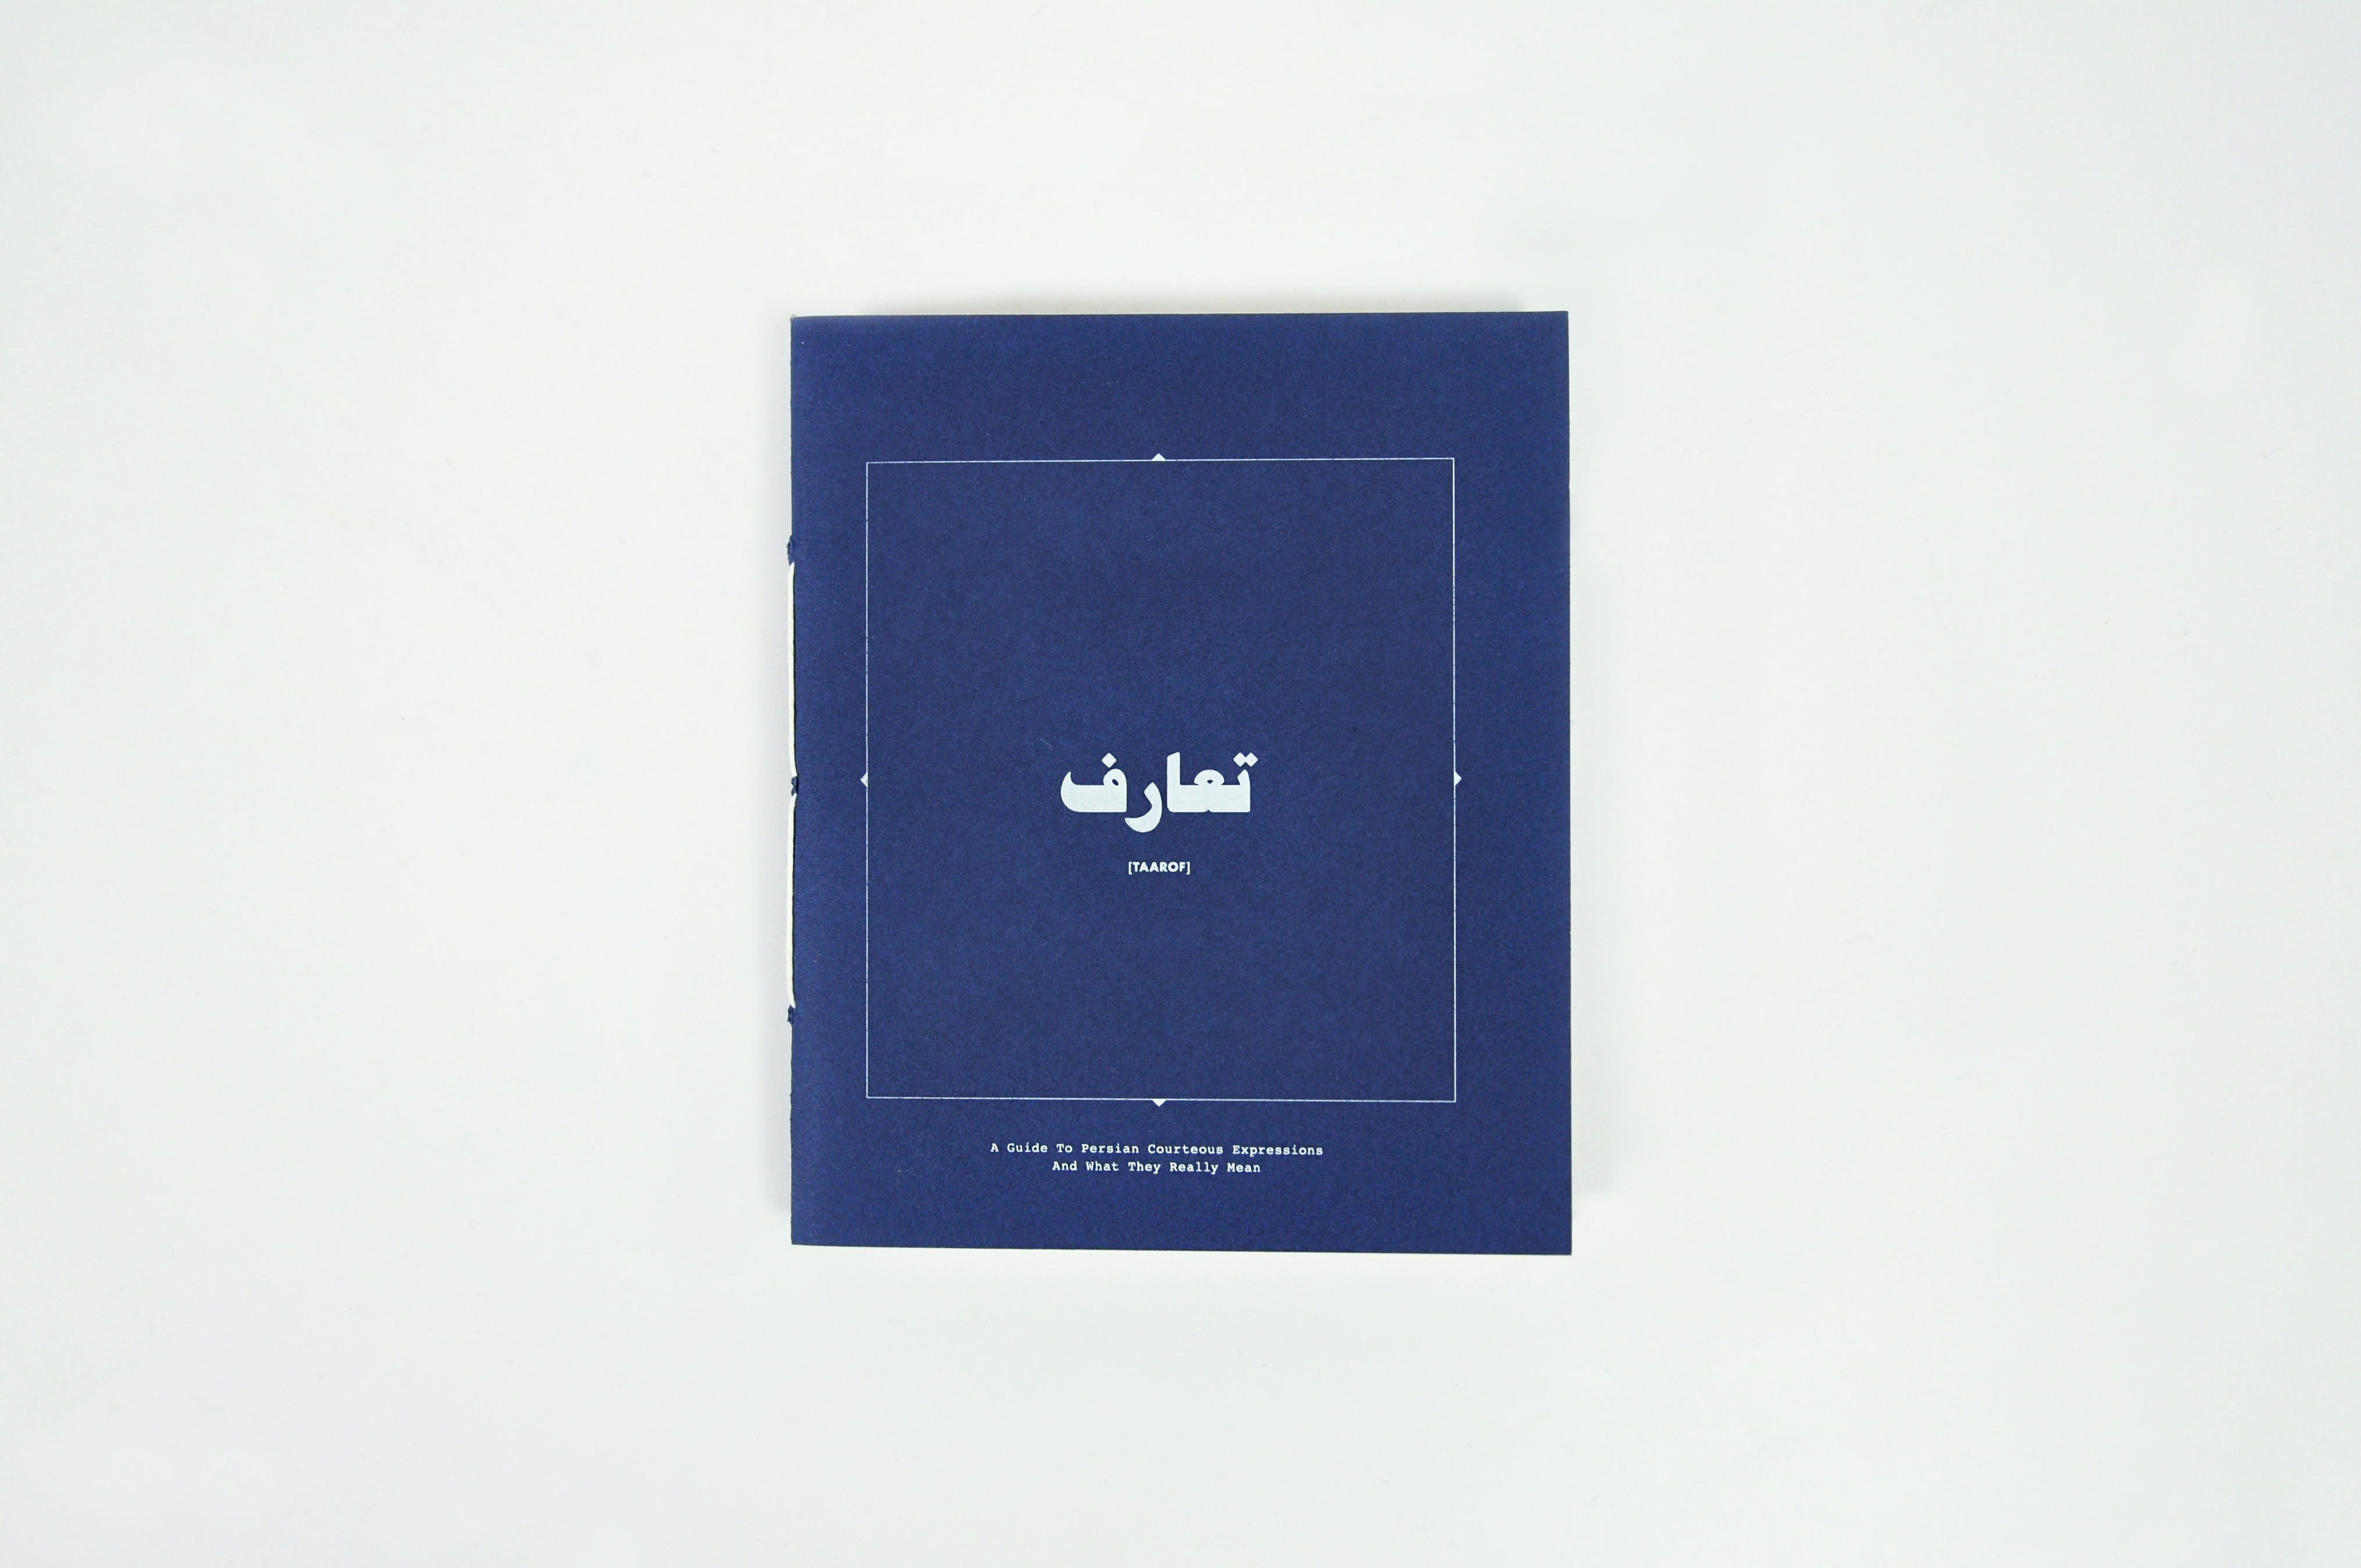 A blue cover of a book with some Arabic white text on it.